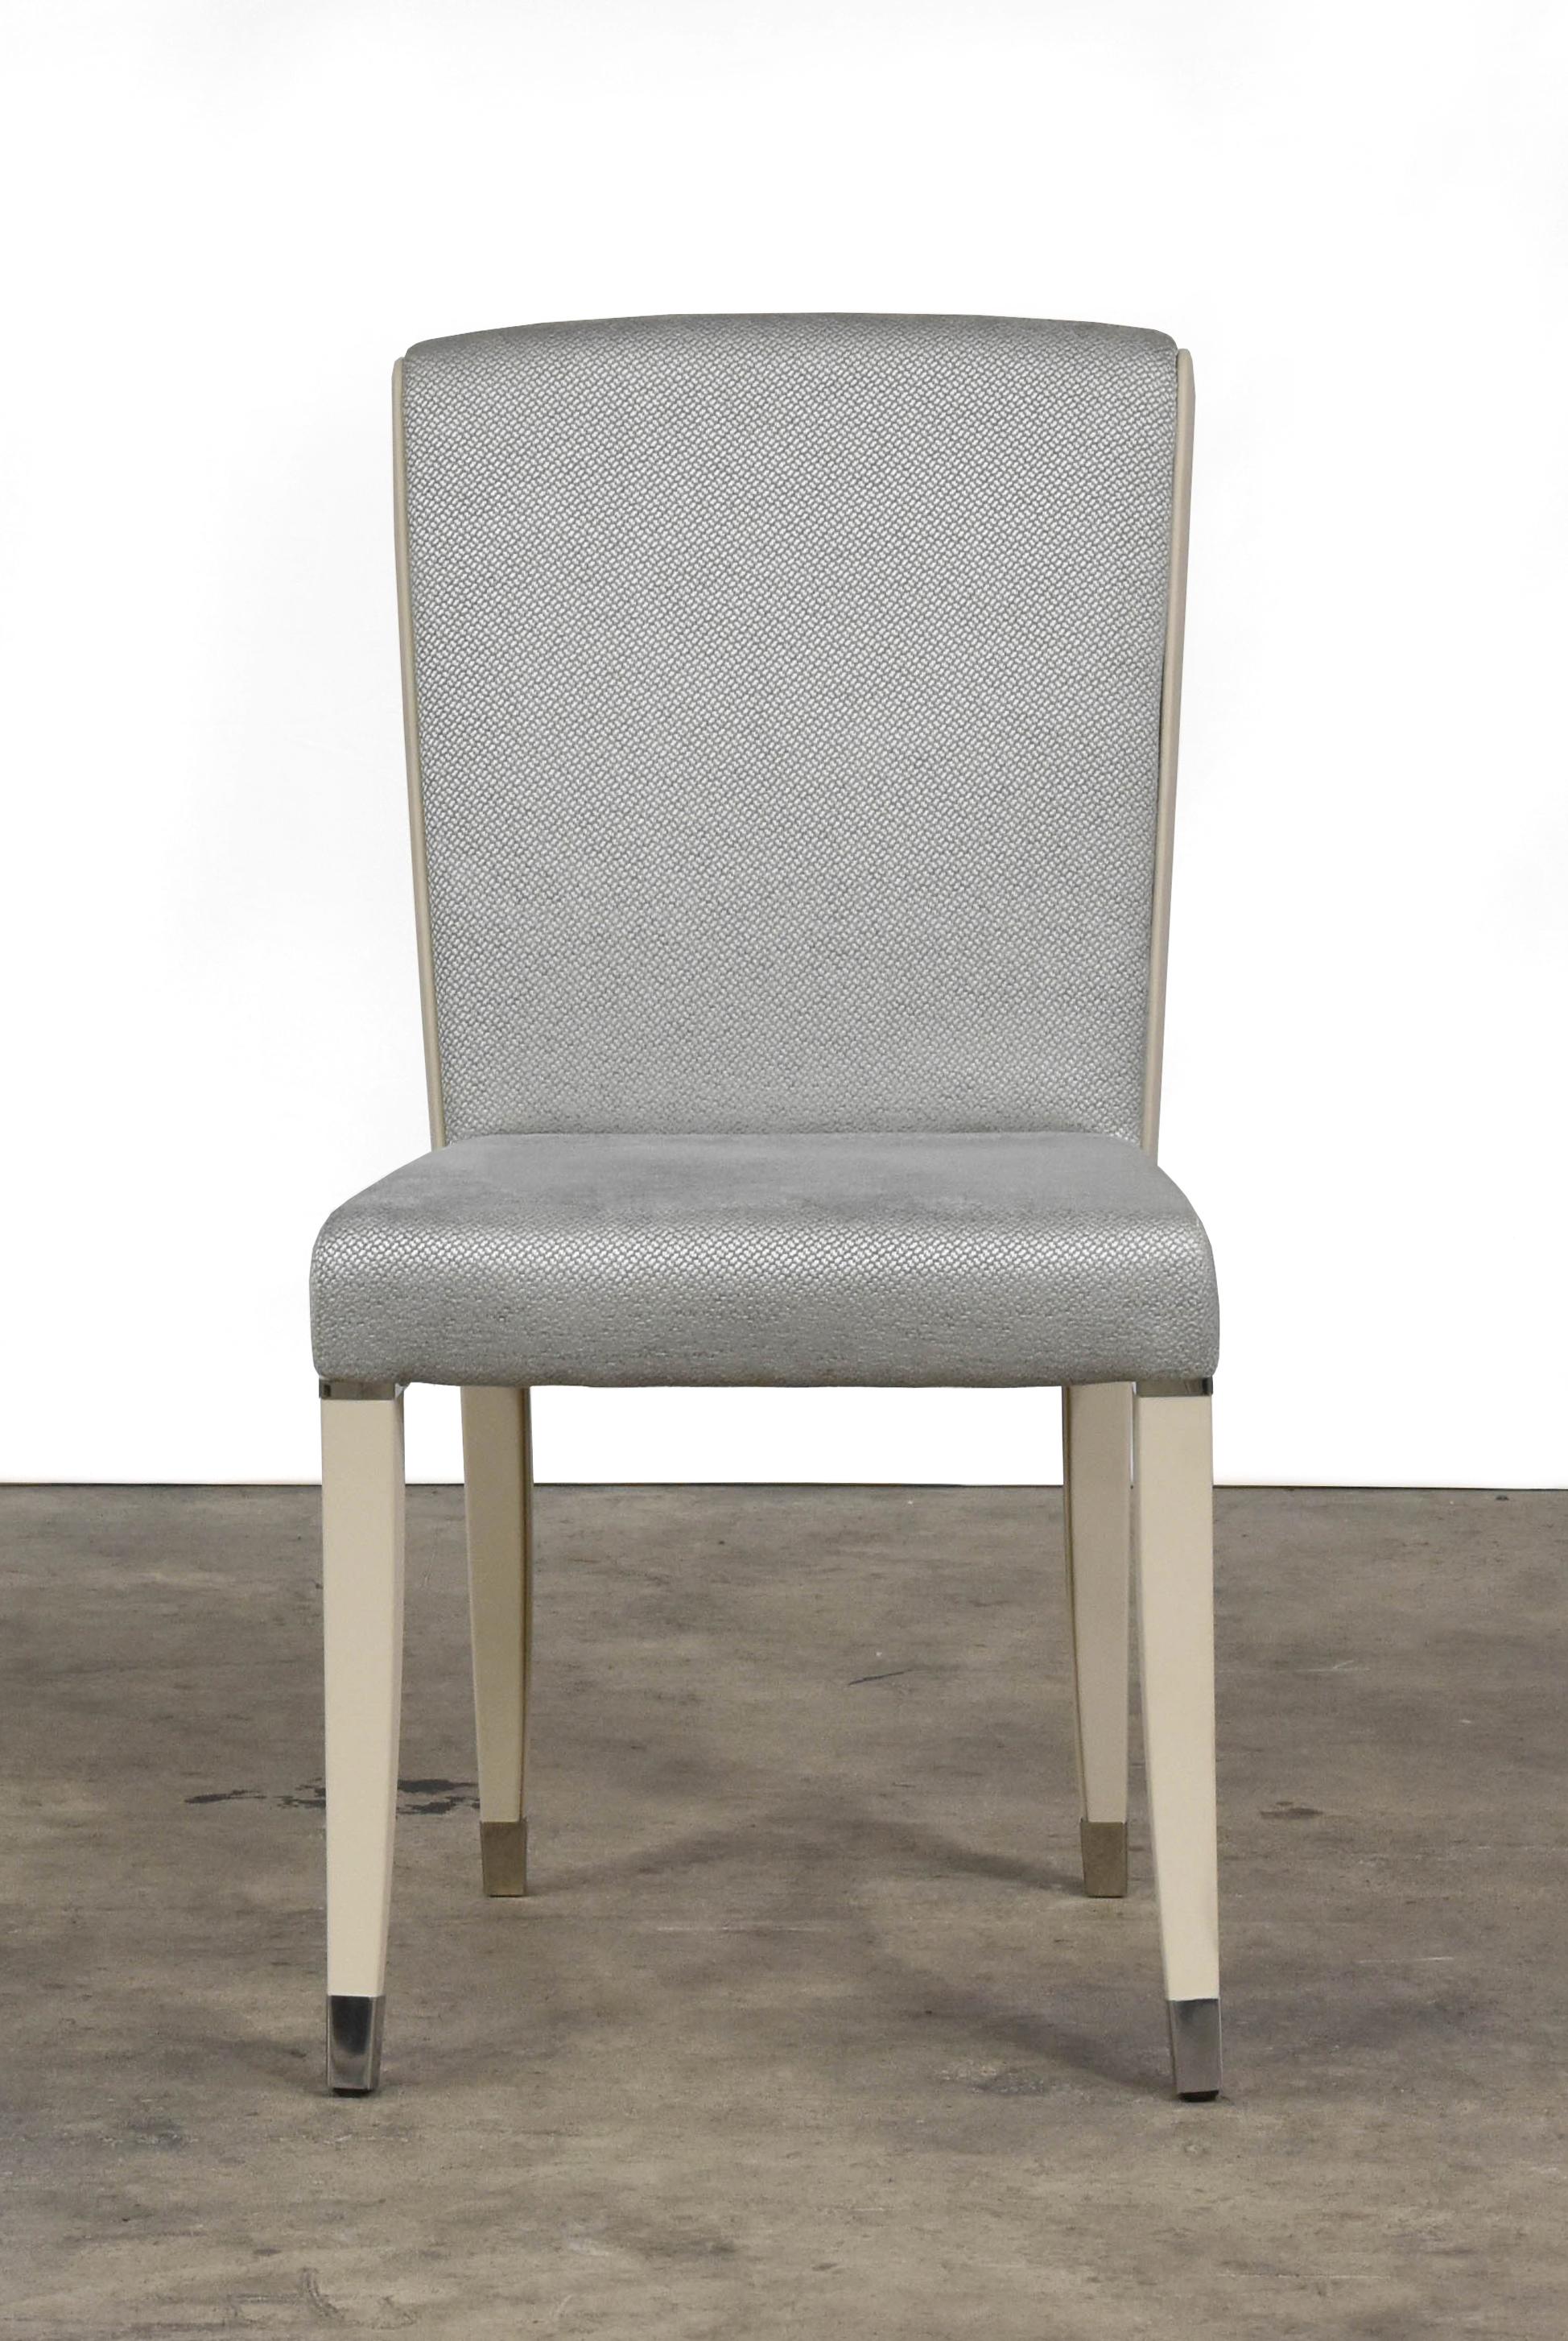 The Aline chair is an elegant option upholstered in ice blue fabric with profile and legs in ivory leather. The chair and legs feature accents in stainless steel.
 